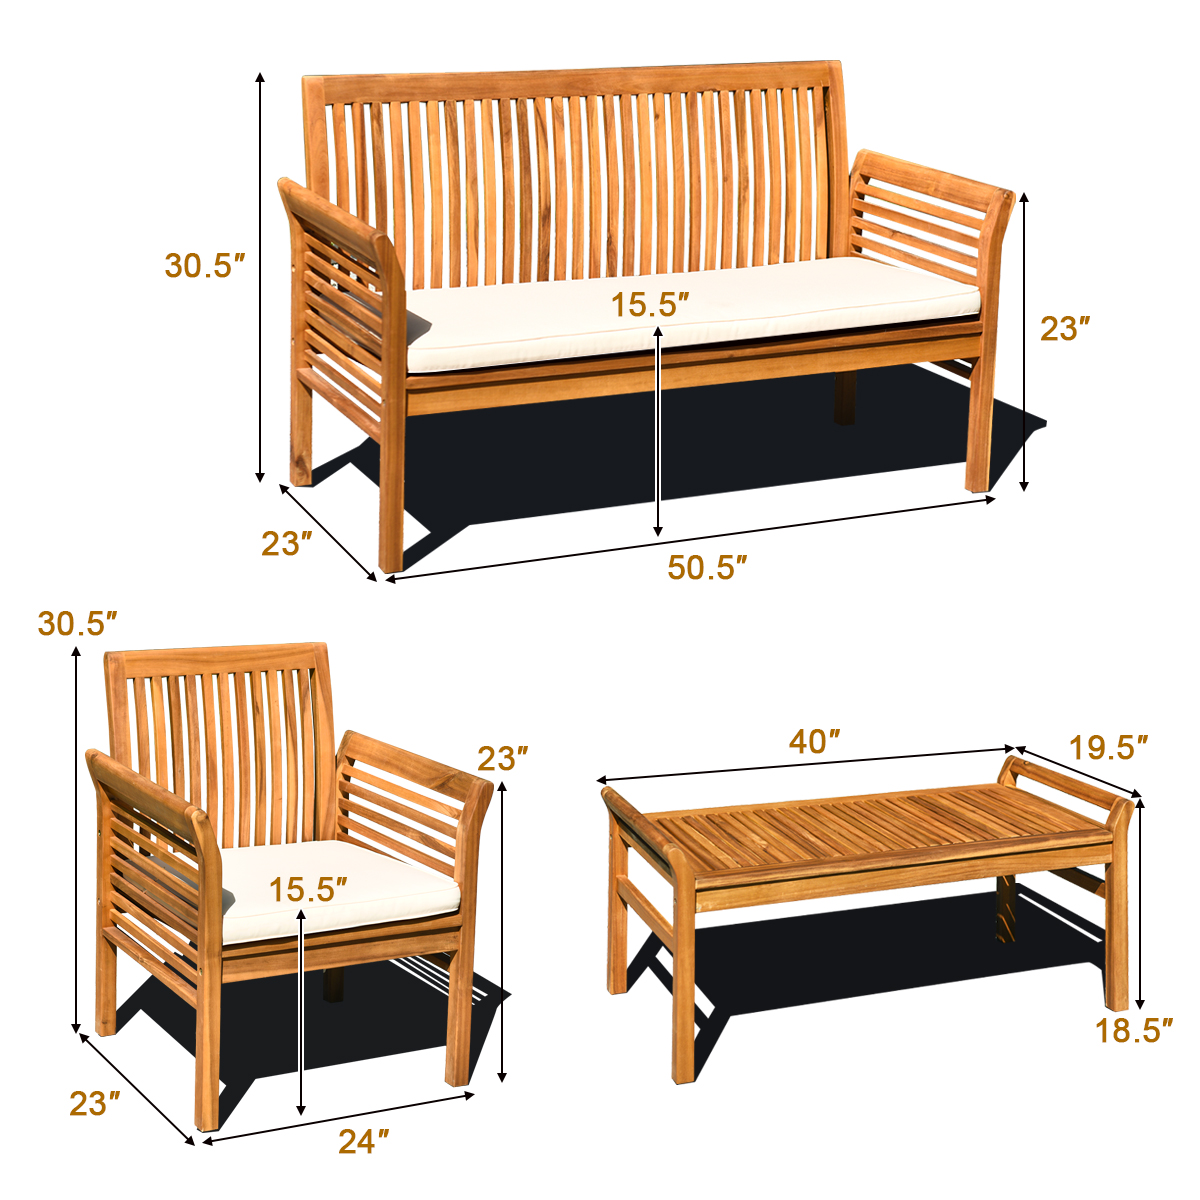 Costway 4 PCS Outdoor Acacia Wood Sofa Furniture Set Cushioned Chair Coffee Table Garden - image 3 of 10